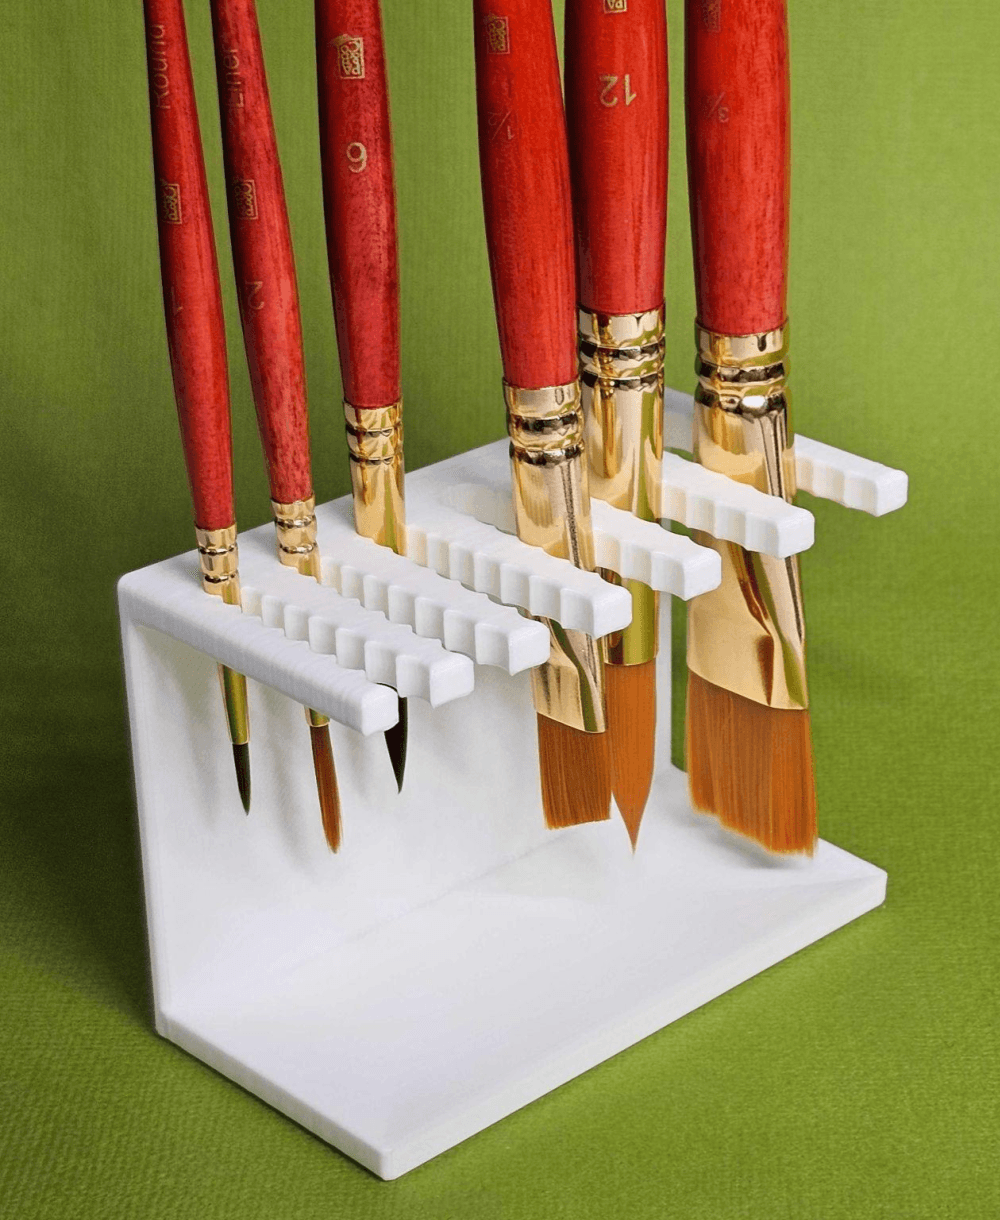 XXS XS S M L XL Paint brush rack | Great gift for artists | Watercolor / acrylic painting 3d model